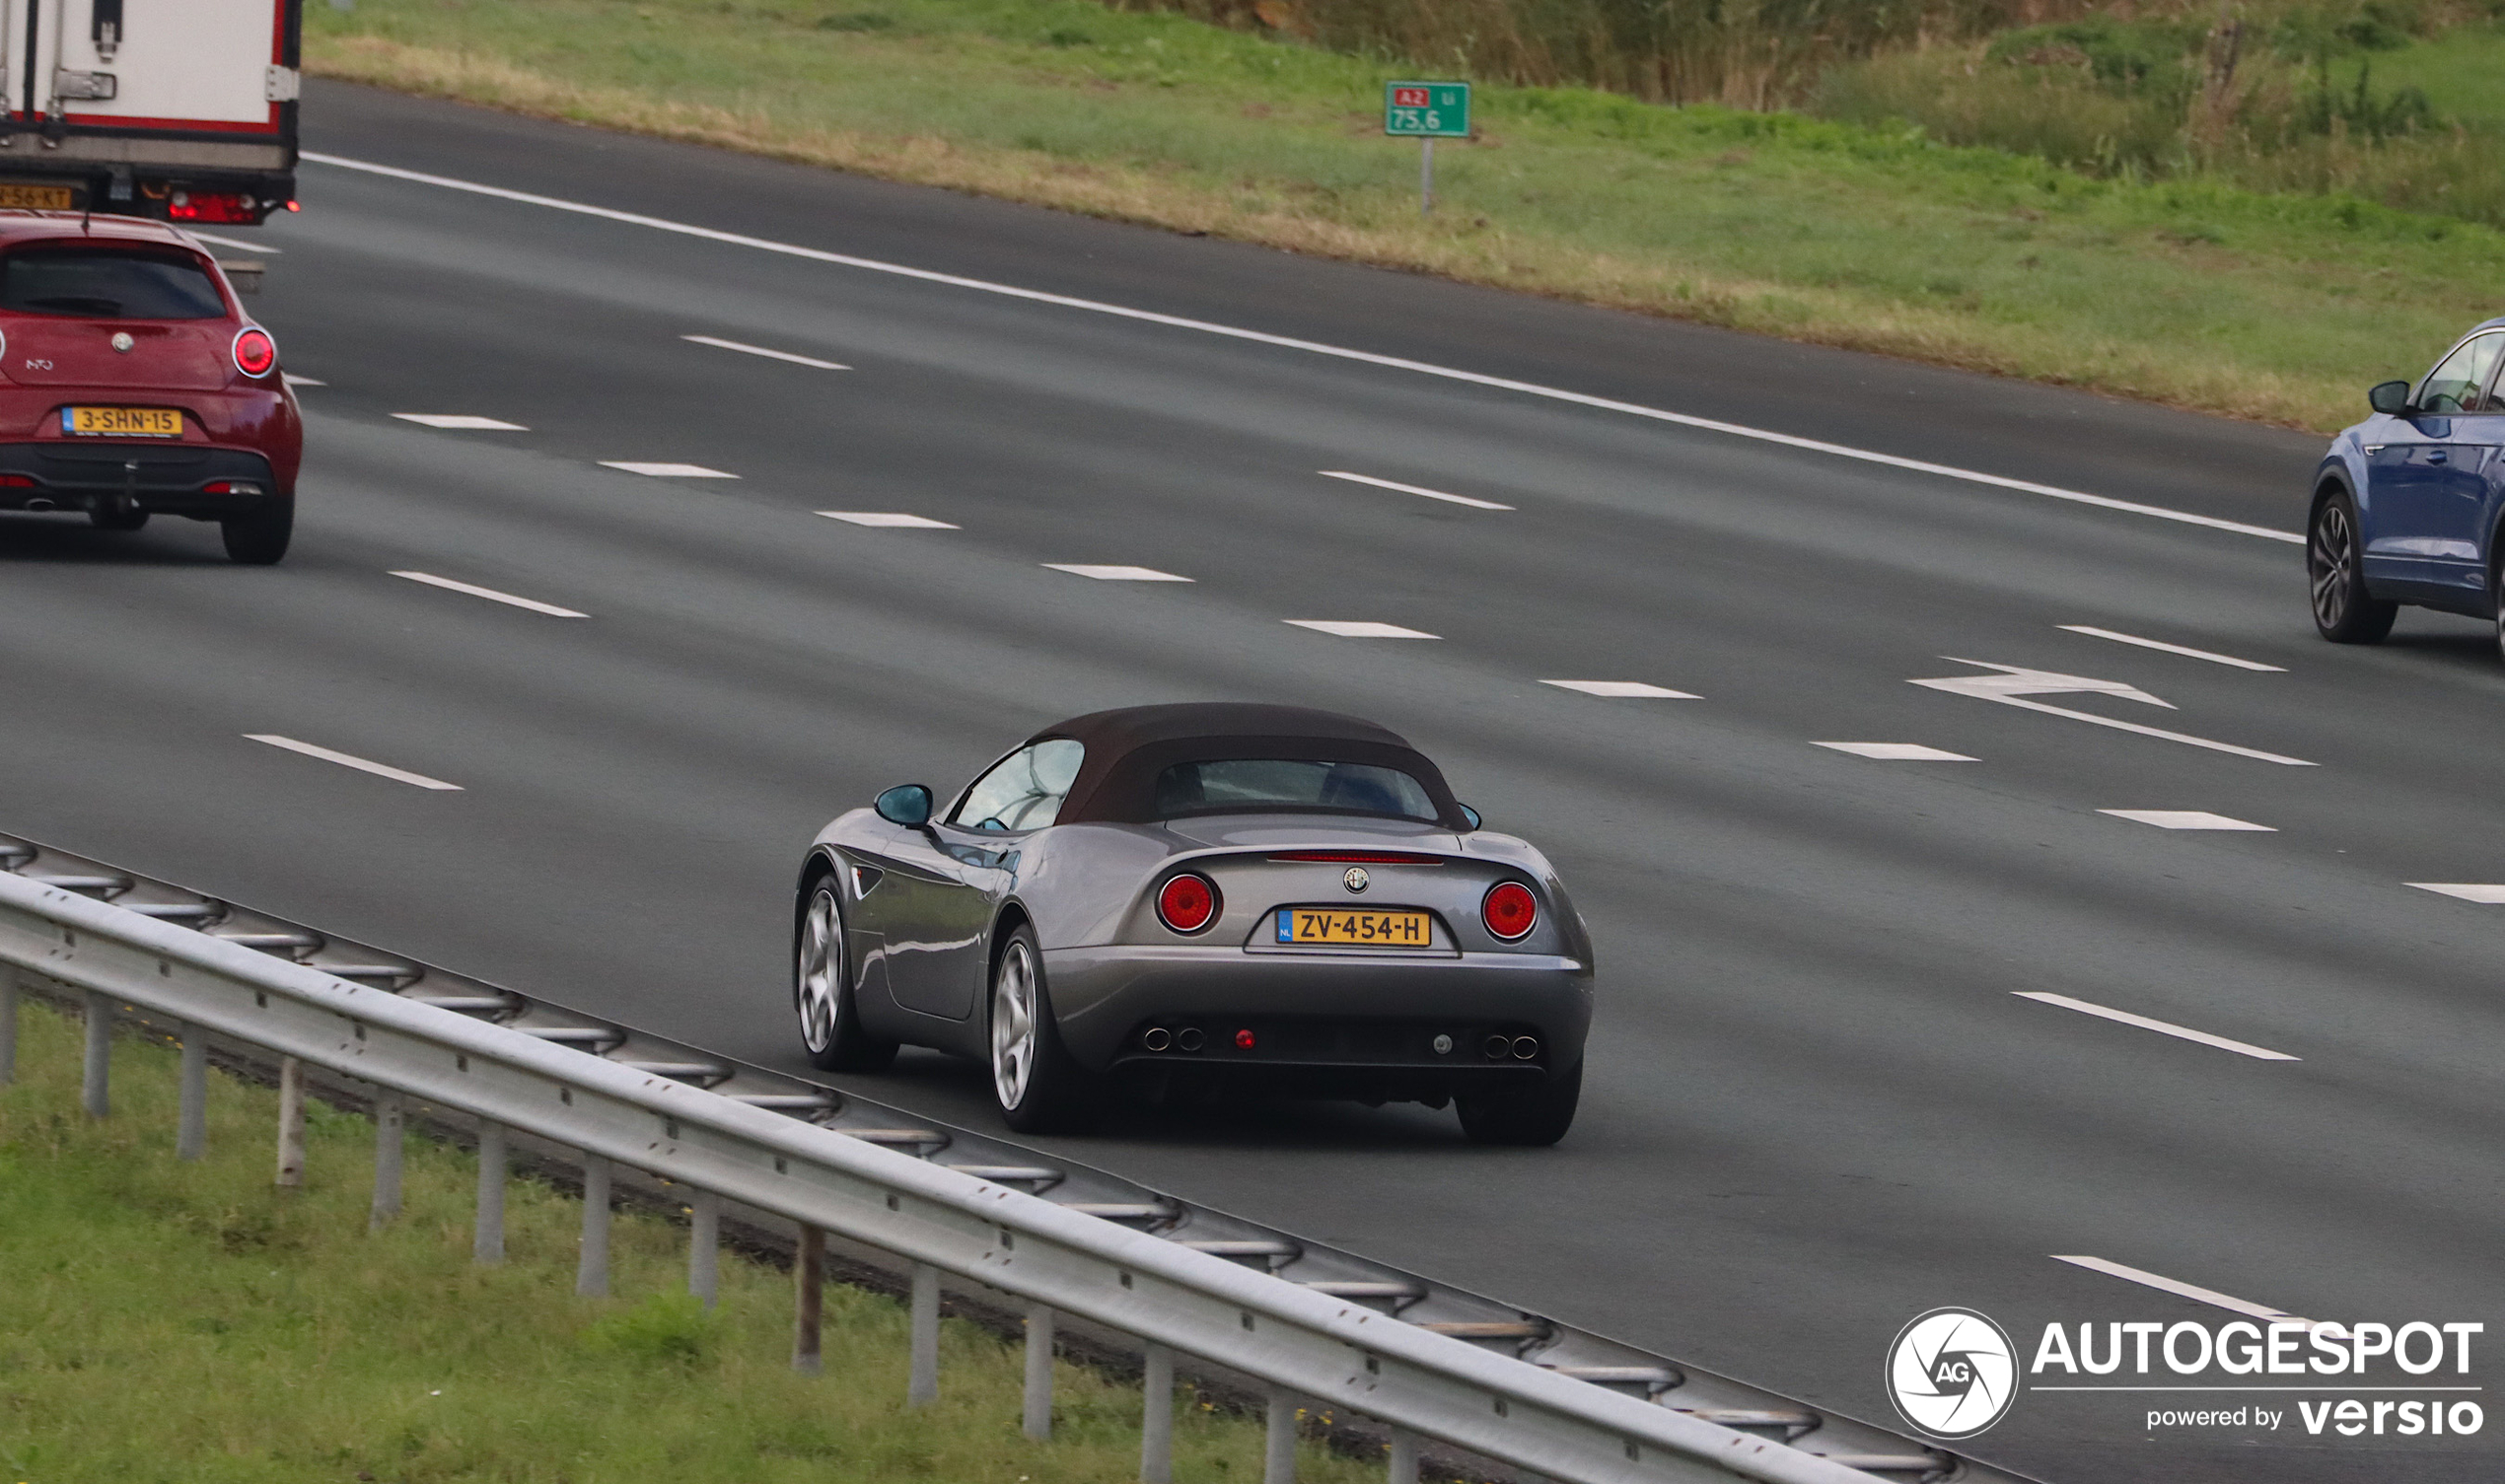 A Beautiful 8C Spyder Spotted on the Highway